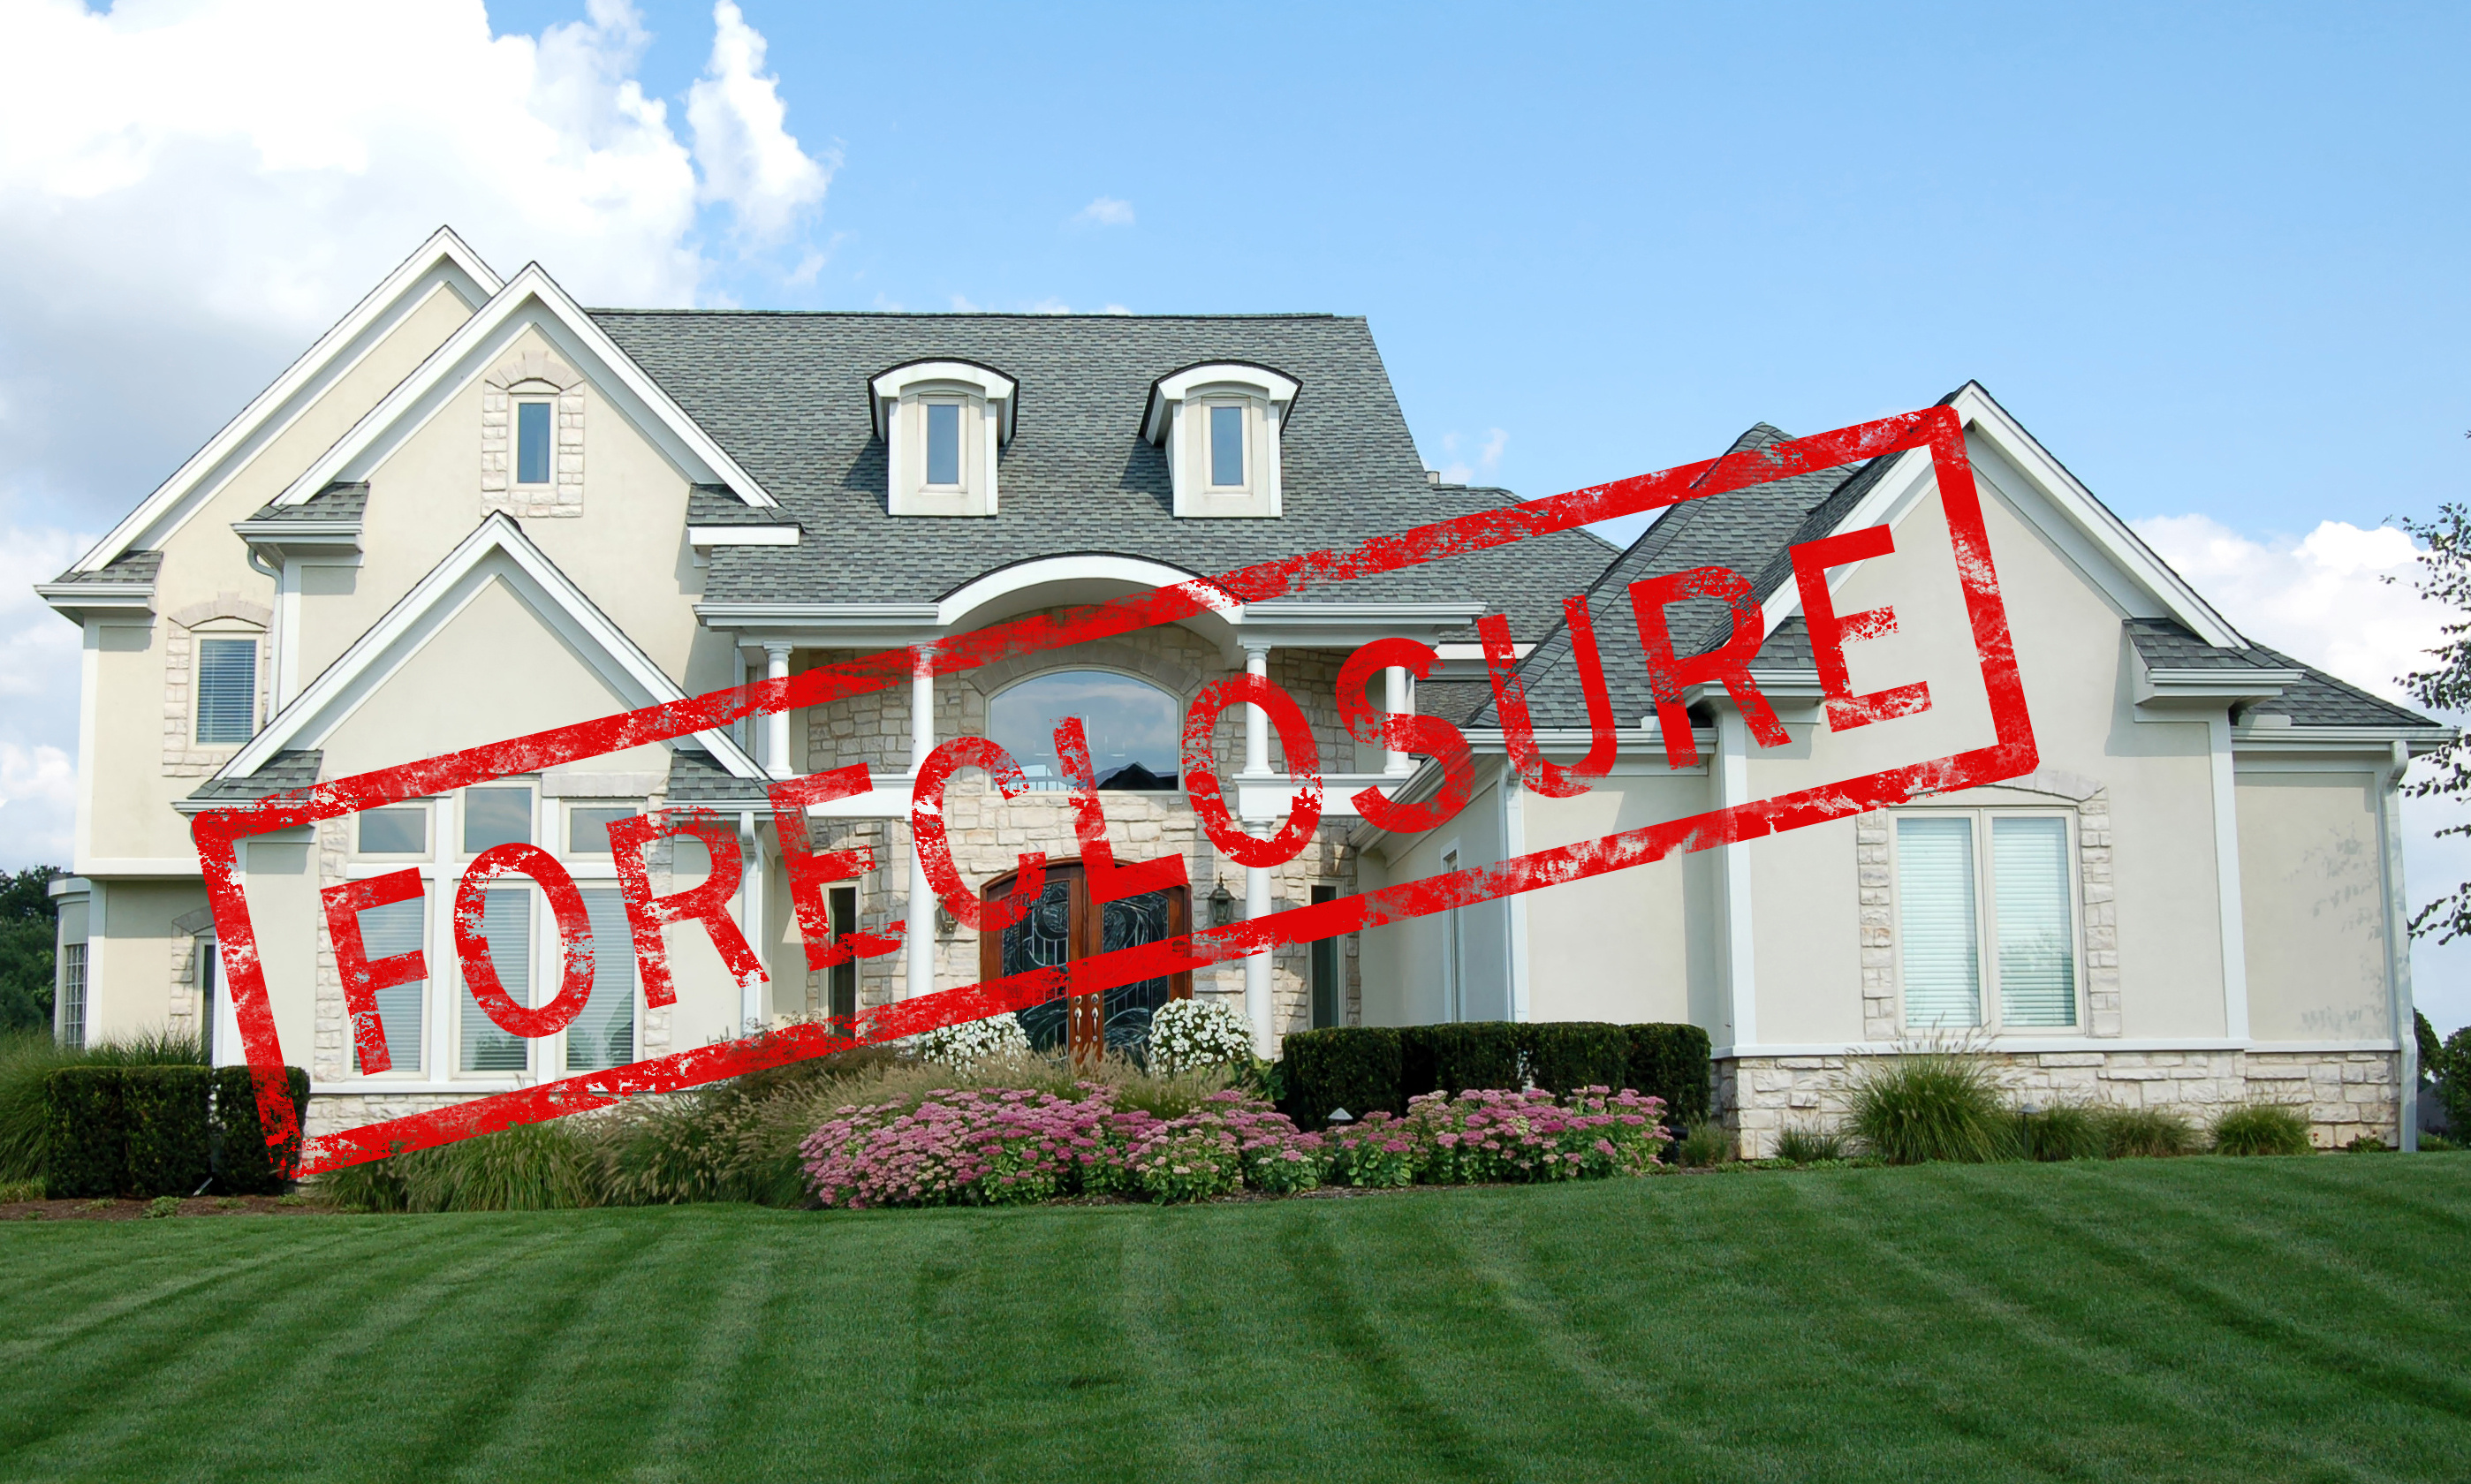 Call Homeowner Appraisal Services when you need valuations regarding Saint Johns foreclosures